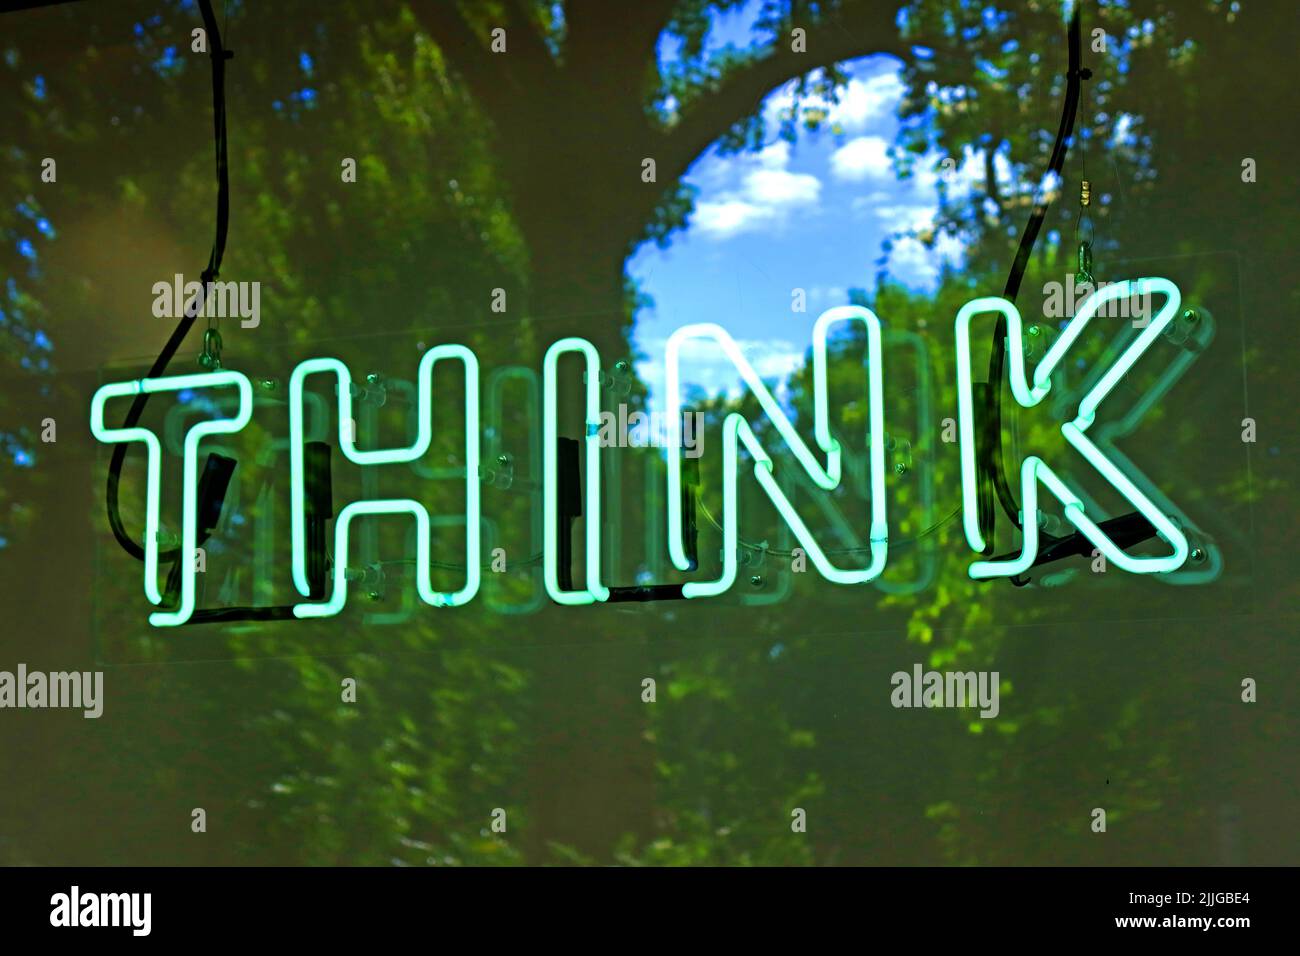 Think green neon electric sign Stock Photo